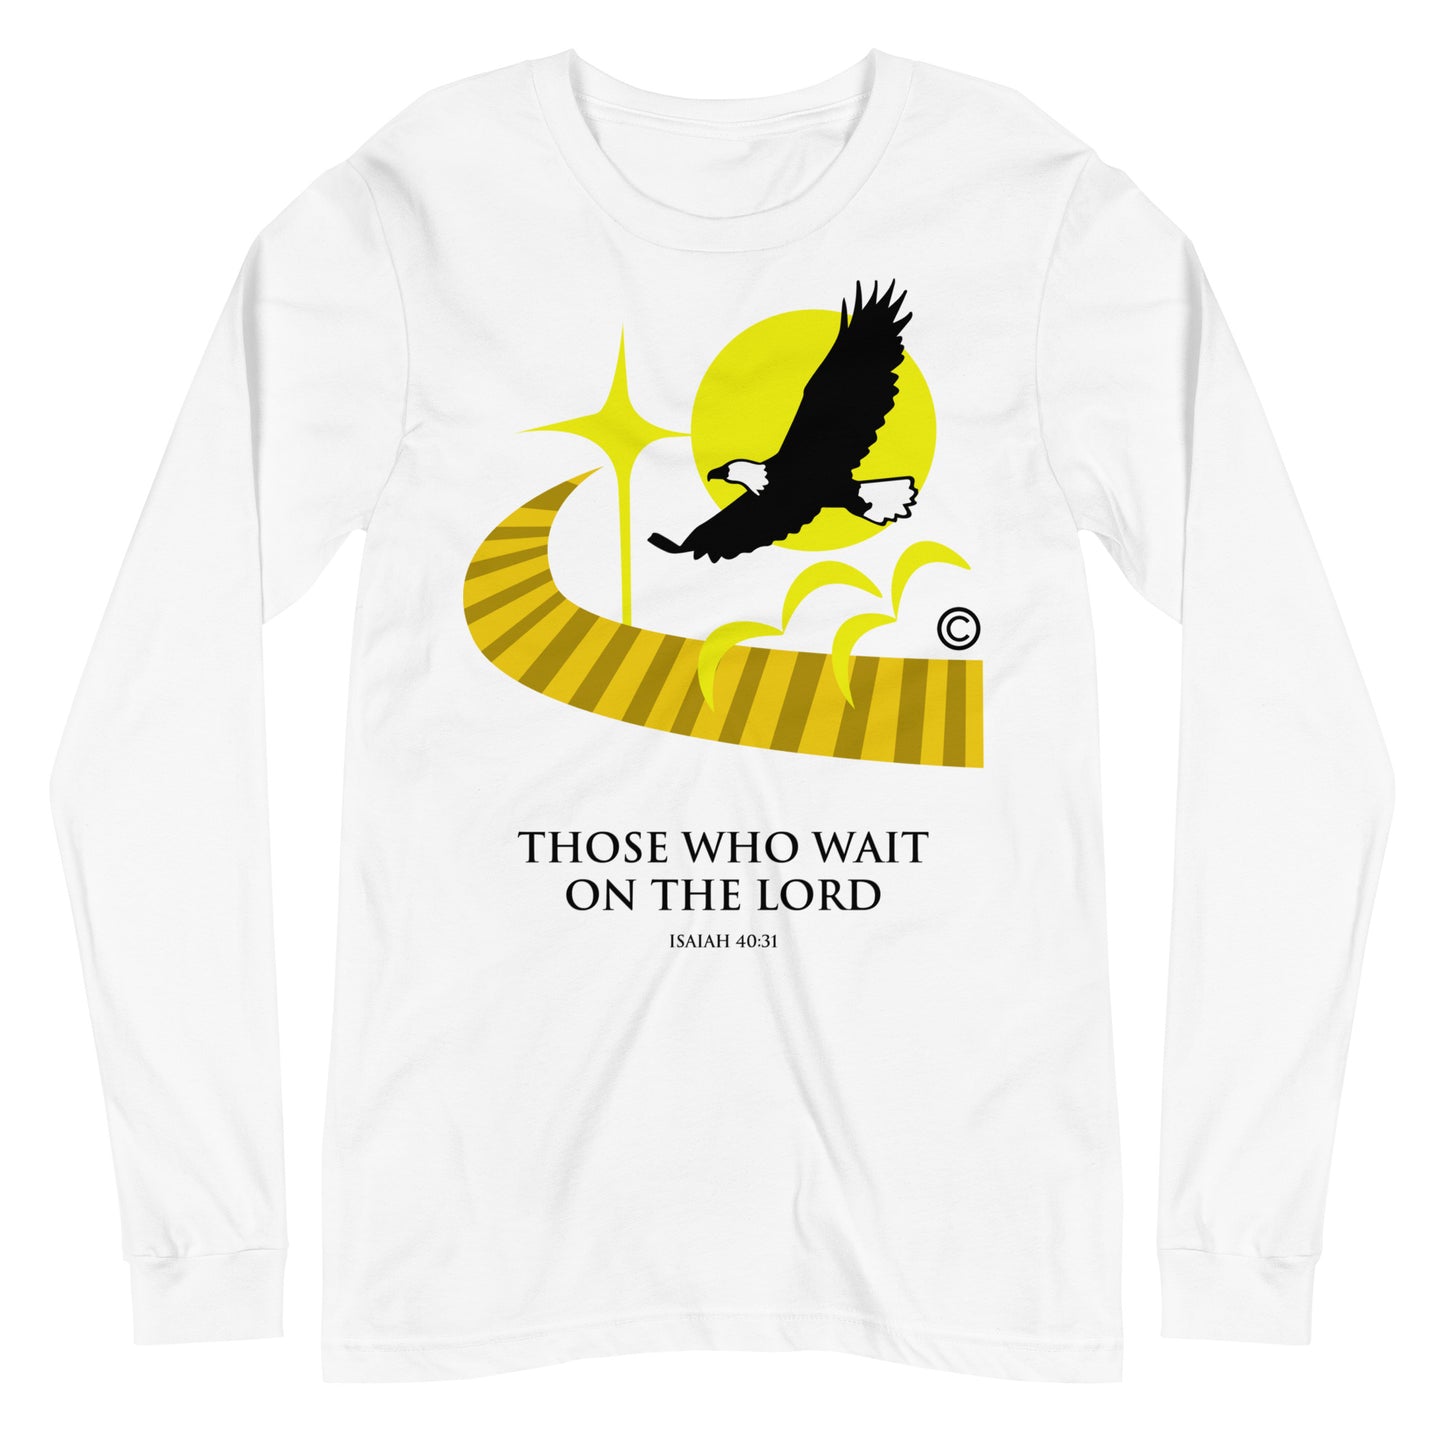 Those Who Wait on the Lord Women's Long Sleeve Tee